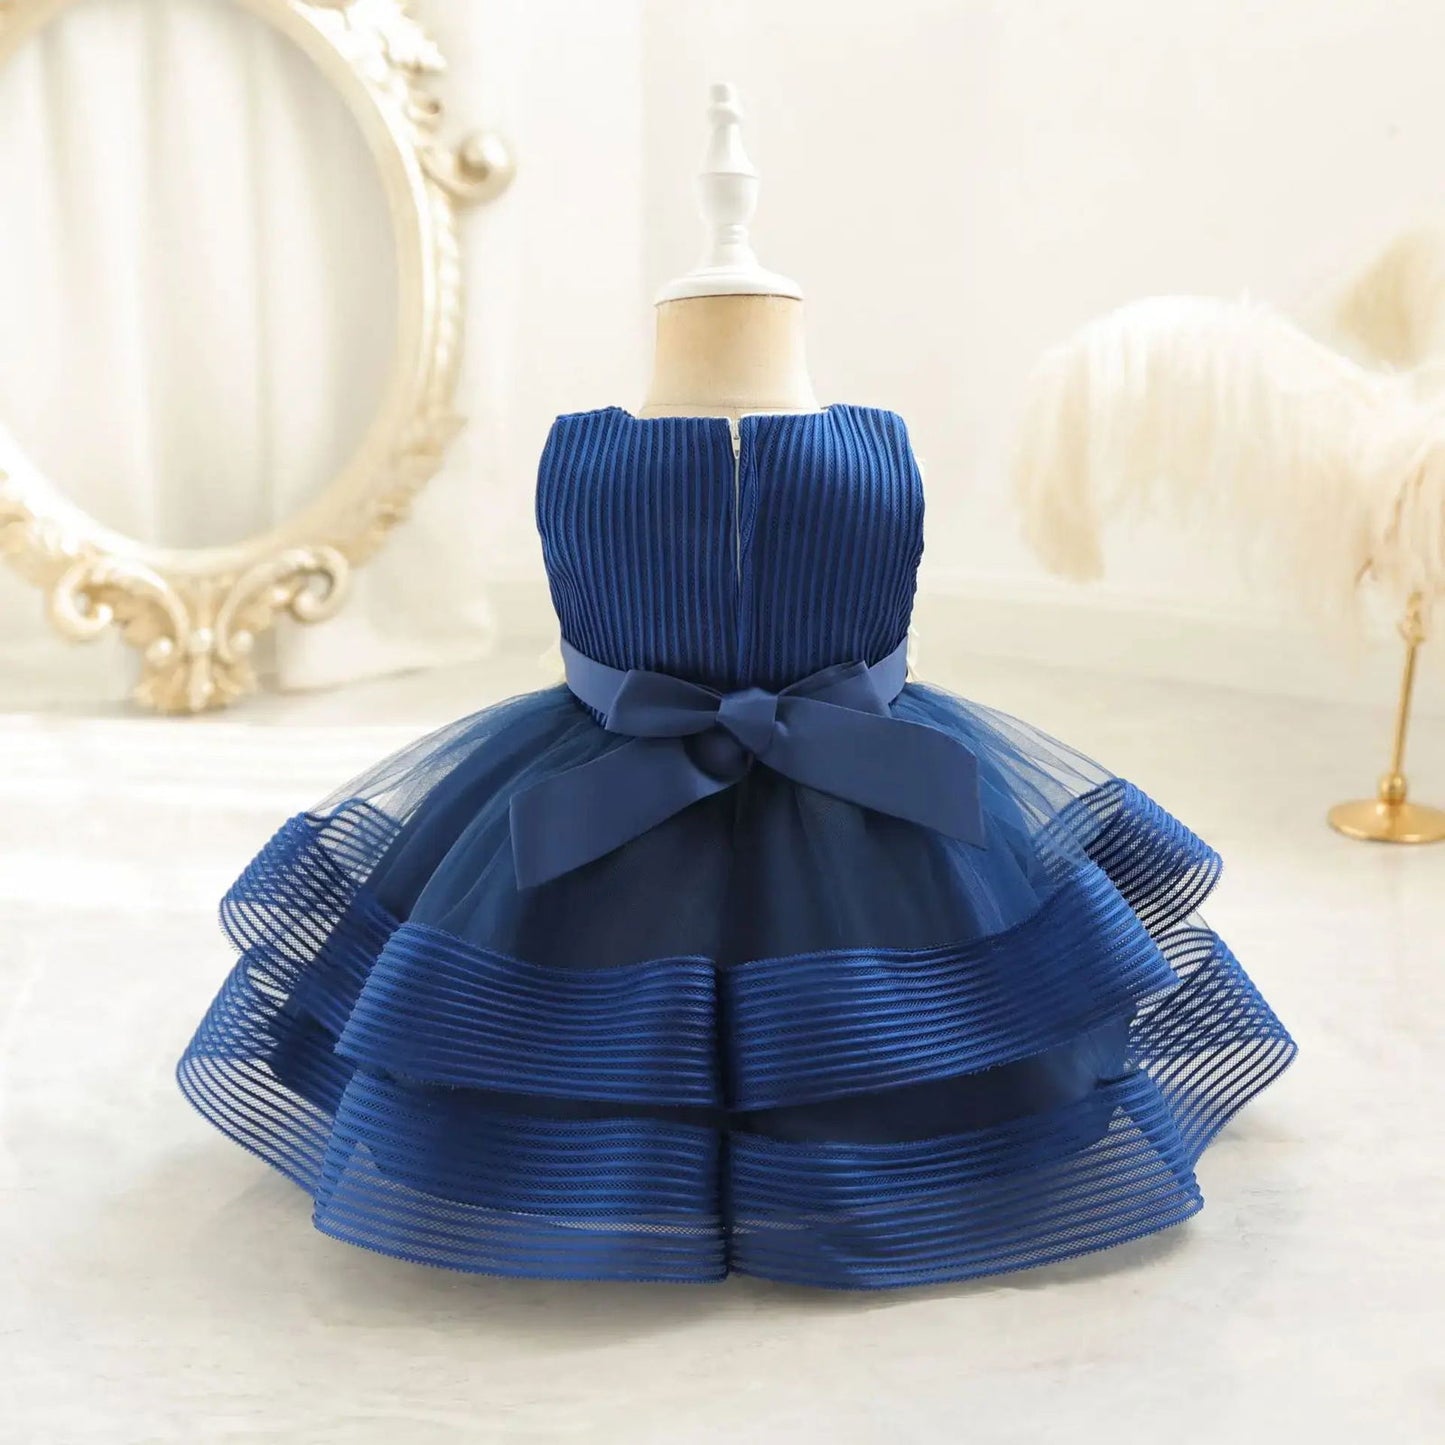 Princess Girl Kid's Dress Flower Bowknot Mesh Layered Baby Party Dresses Striped White Sleeveless Toddler Frocks 0 To 24 Months - ARCHE